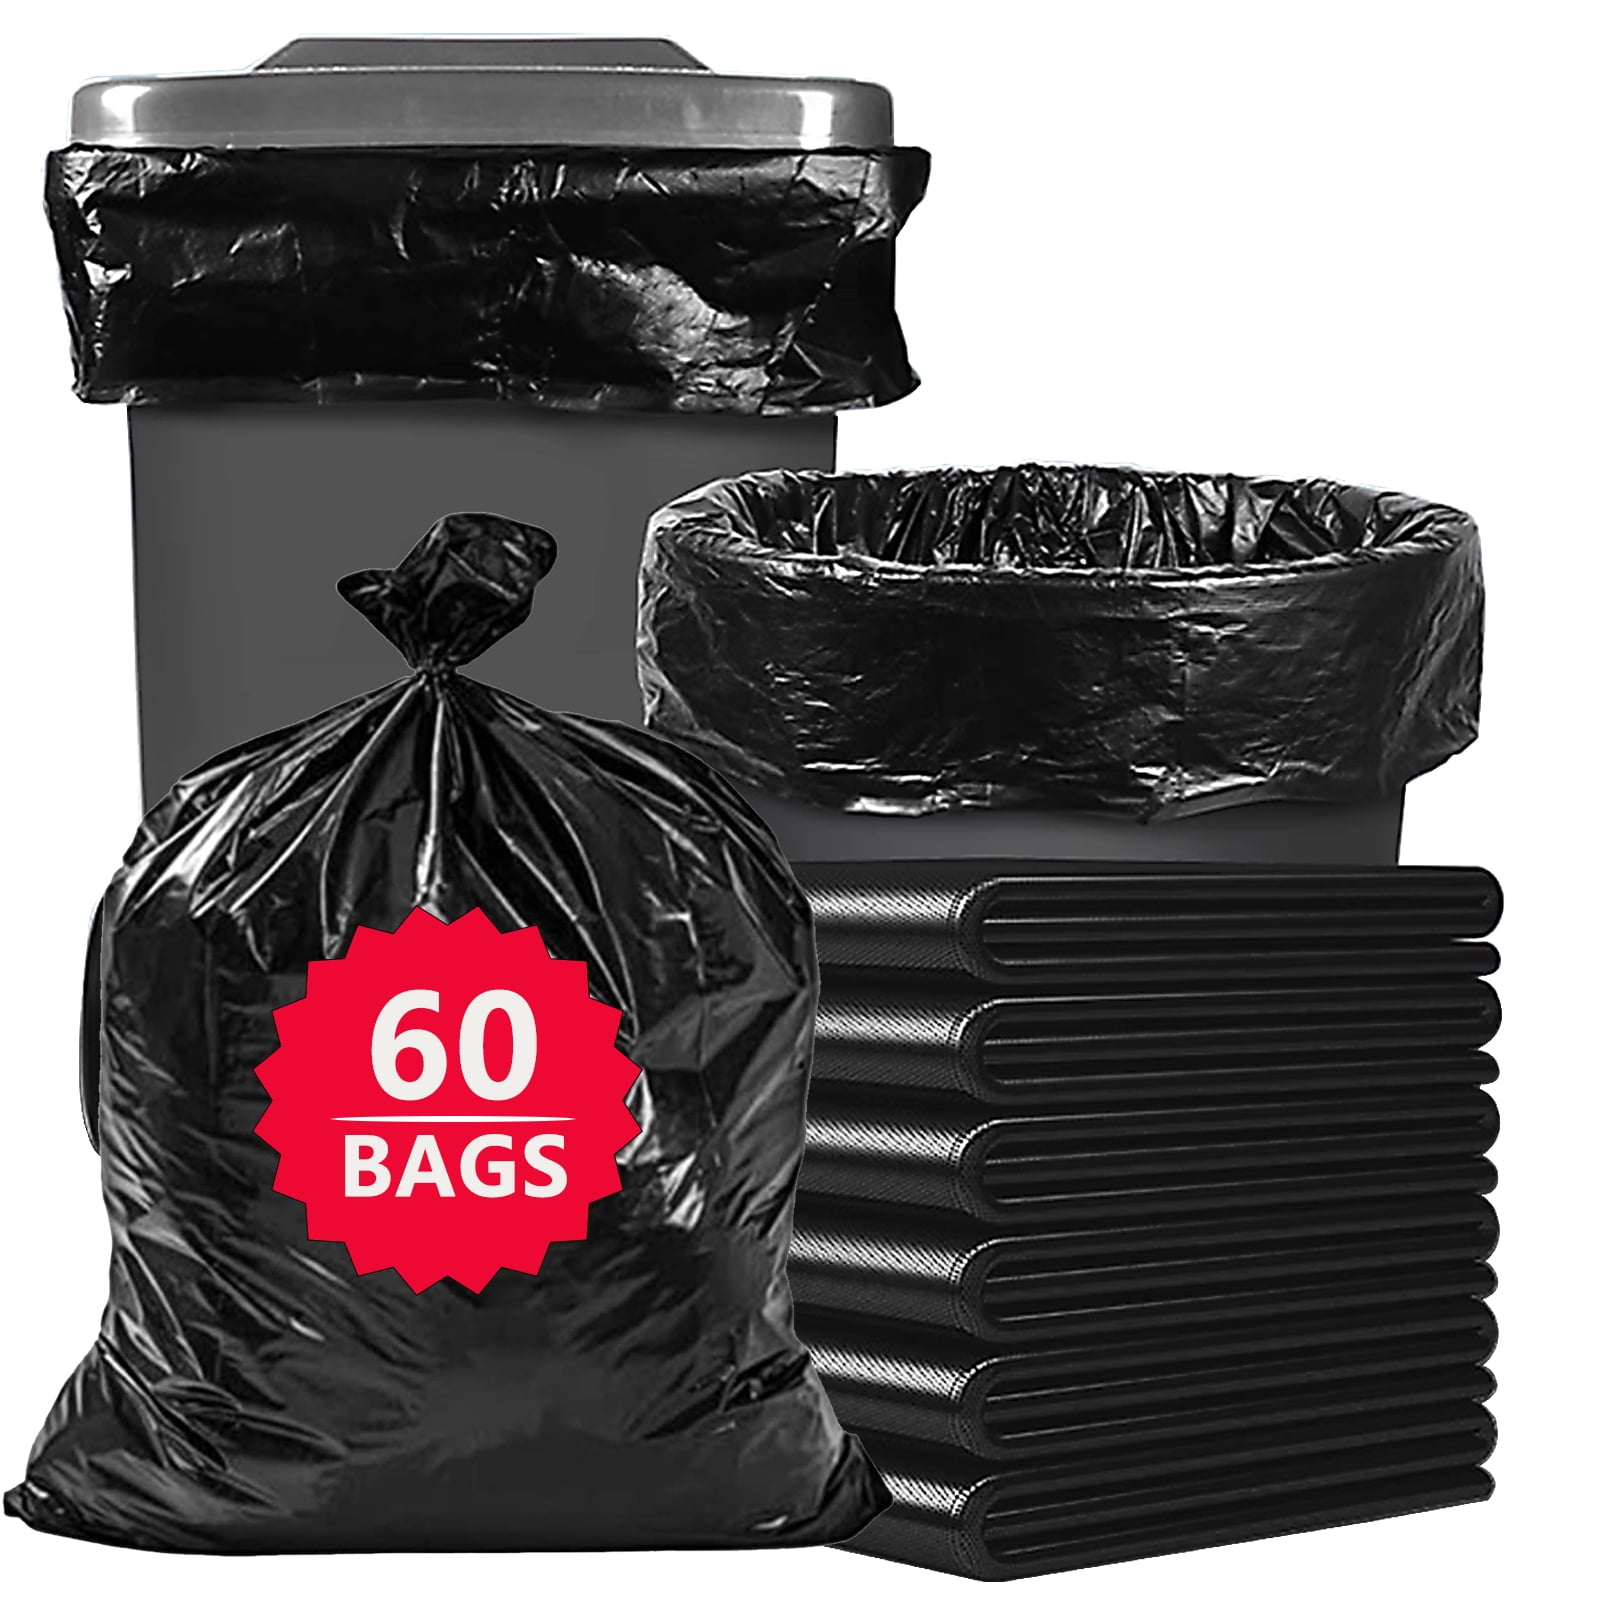 Husky 42 Gal. Contractor Bags (100-Count) HK42WC050B-2PK - The